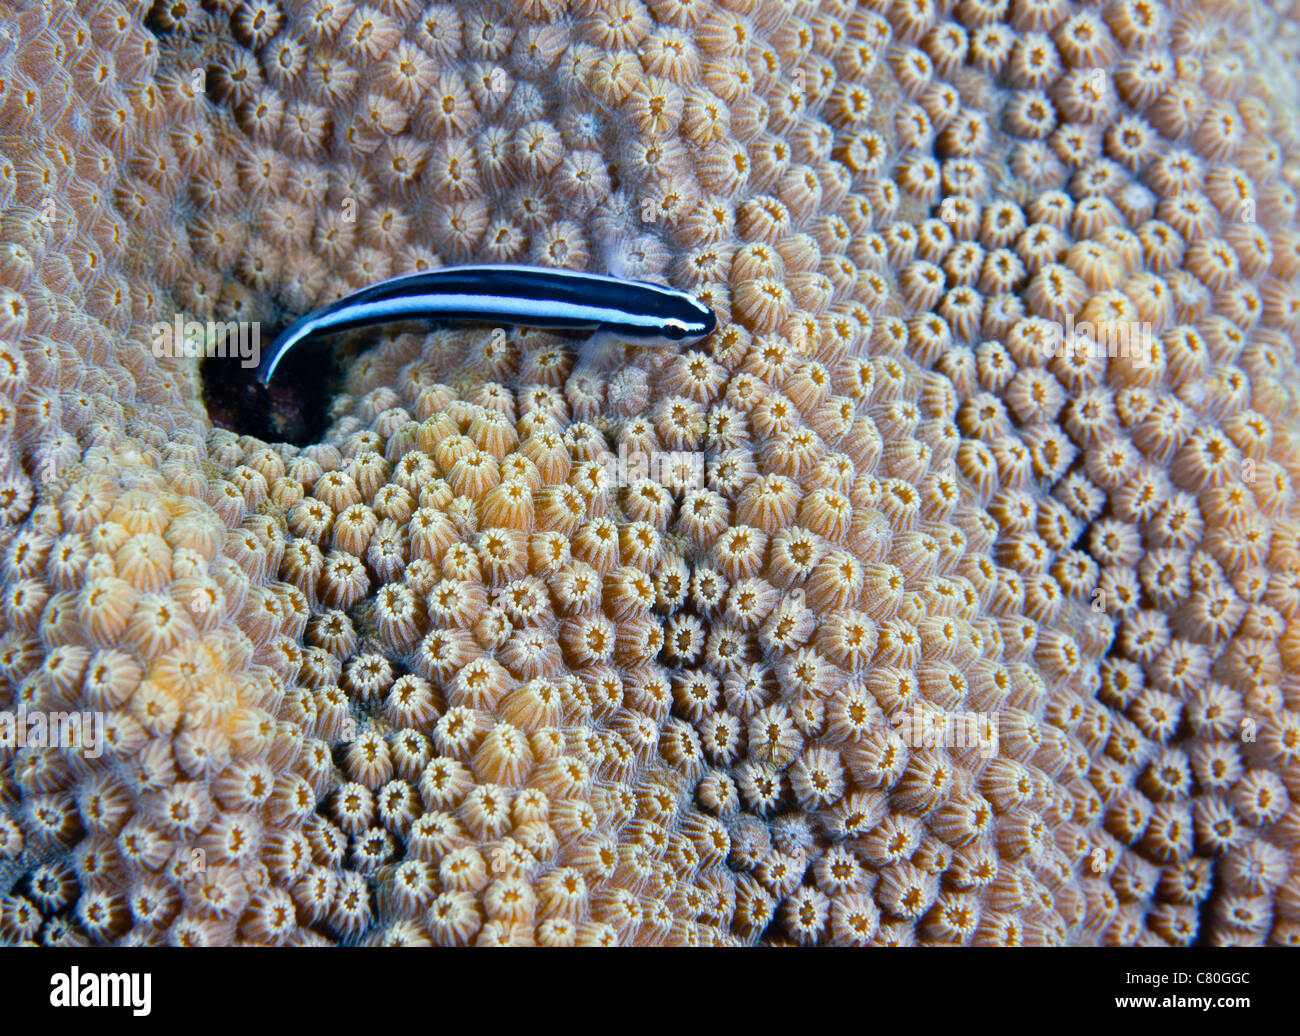 A Neon Goby takes a look outside its hole in live boulder star coral. Stock Photo